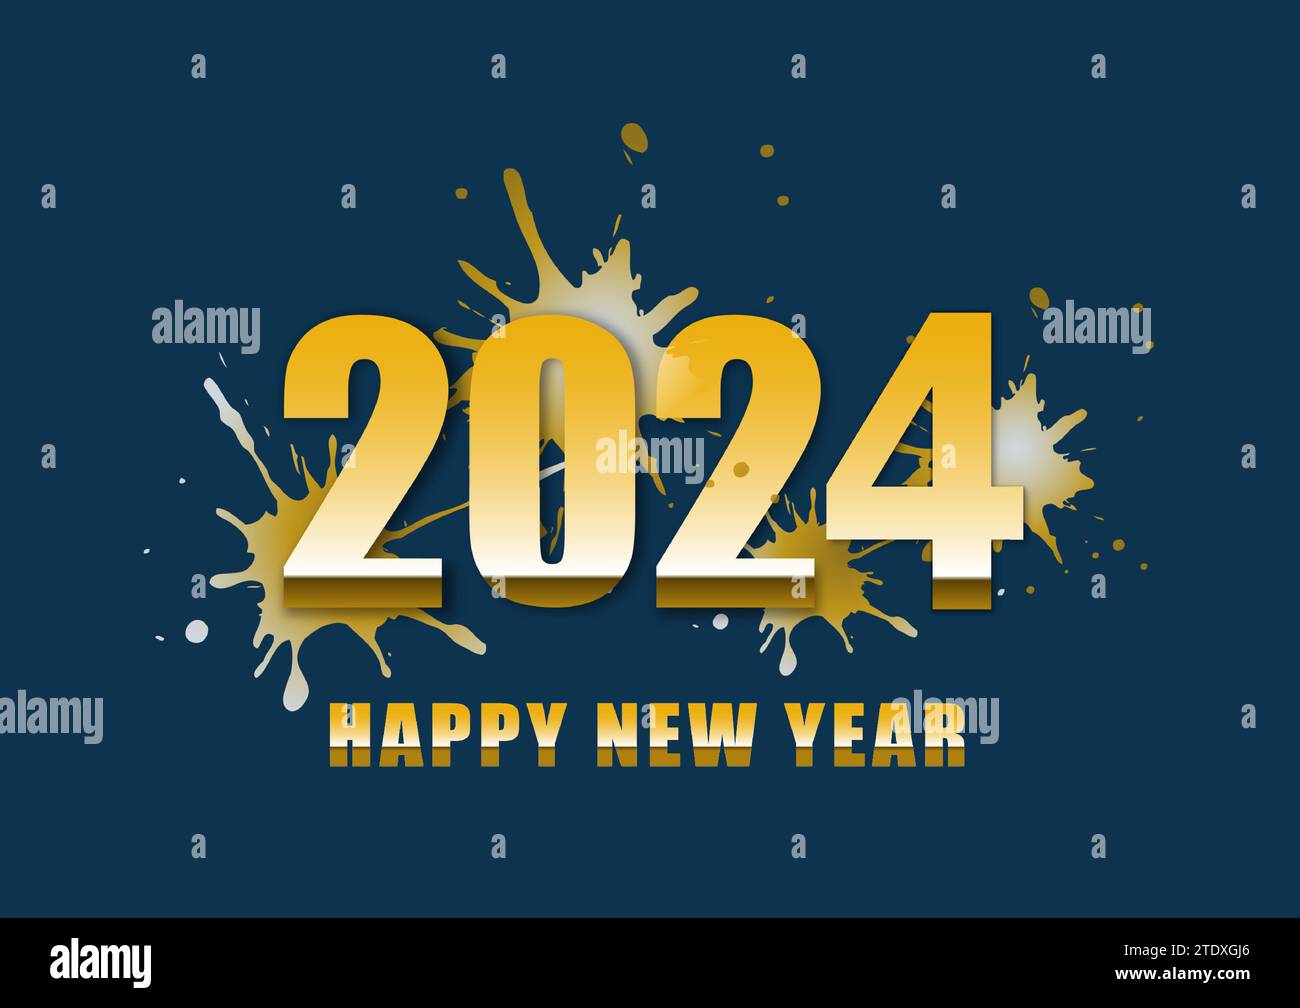 Happy new year 2024 with text design on blue background Stock Vector